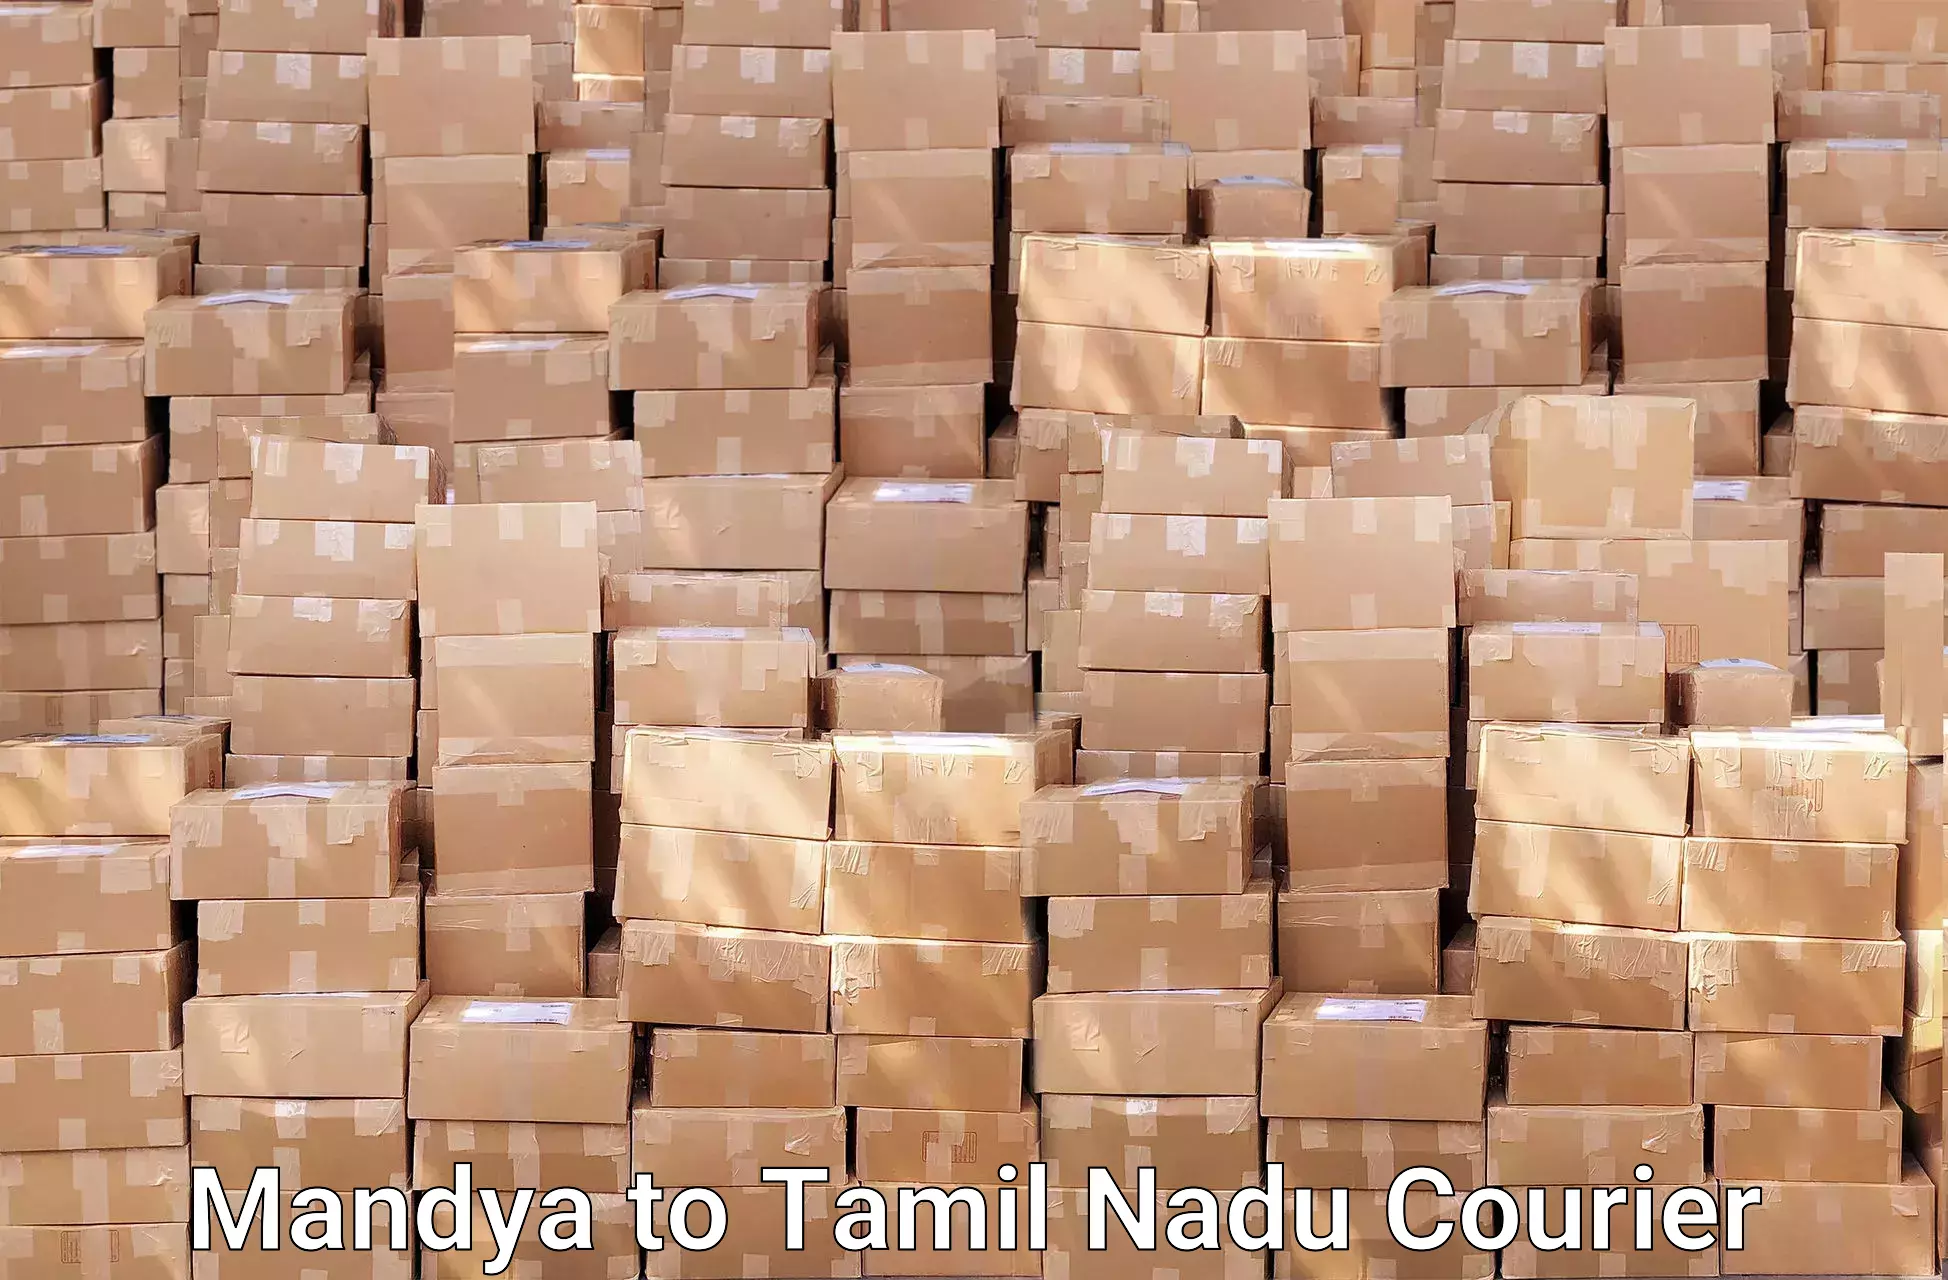 Efficient packing and moving Mandya to Shanmugha Arts Science Technology and Research Academy Thanjavur